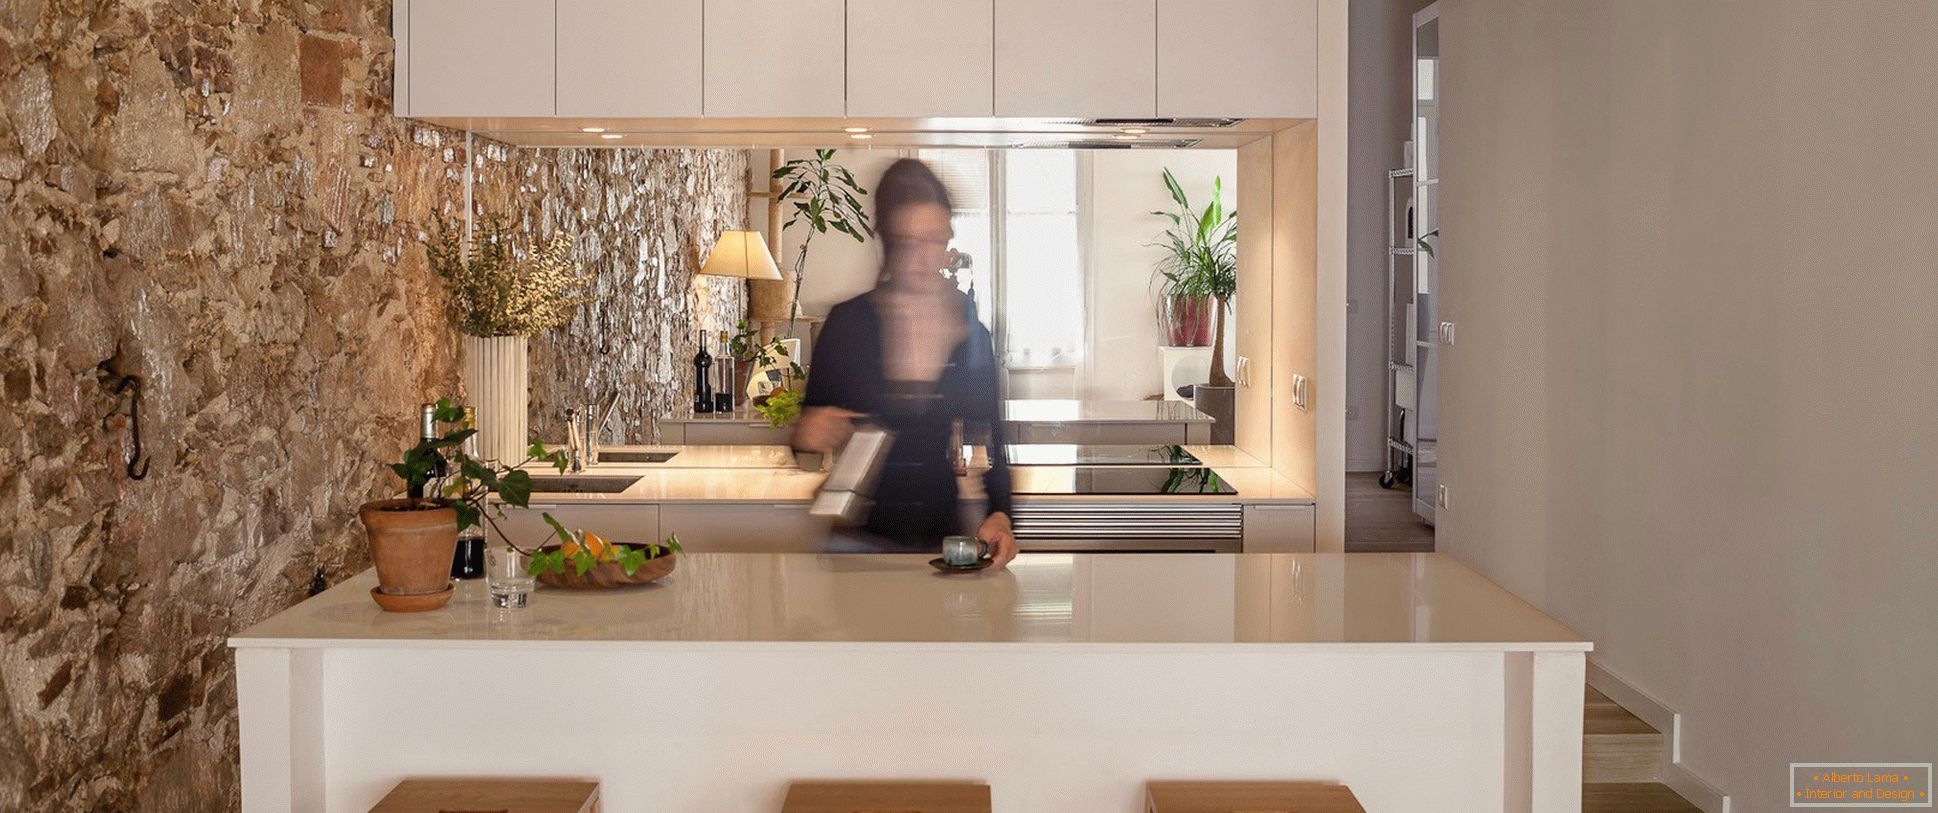 Large mirror in the kitchen